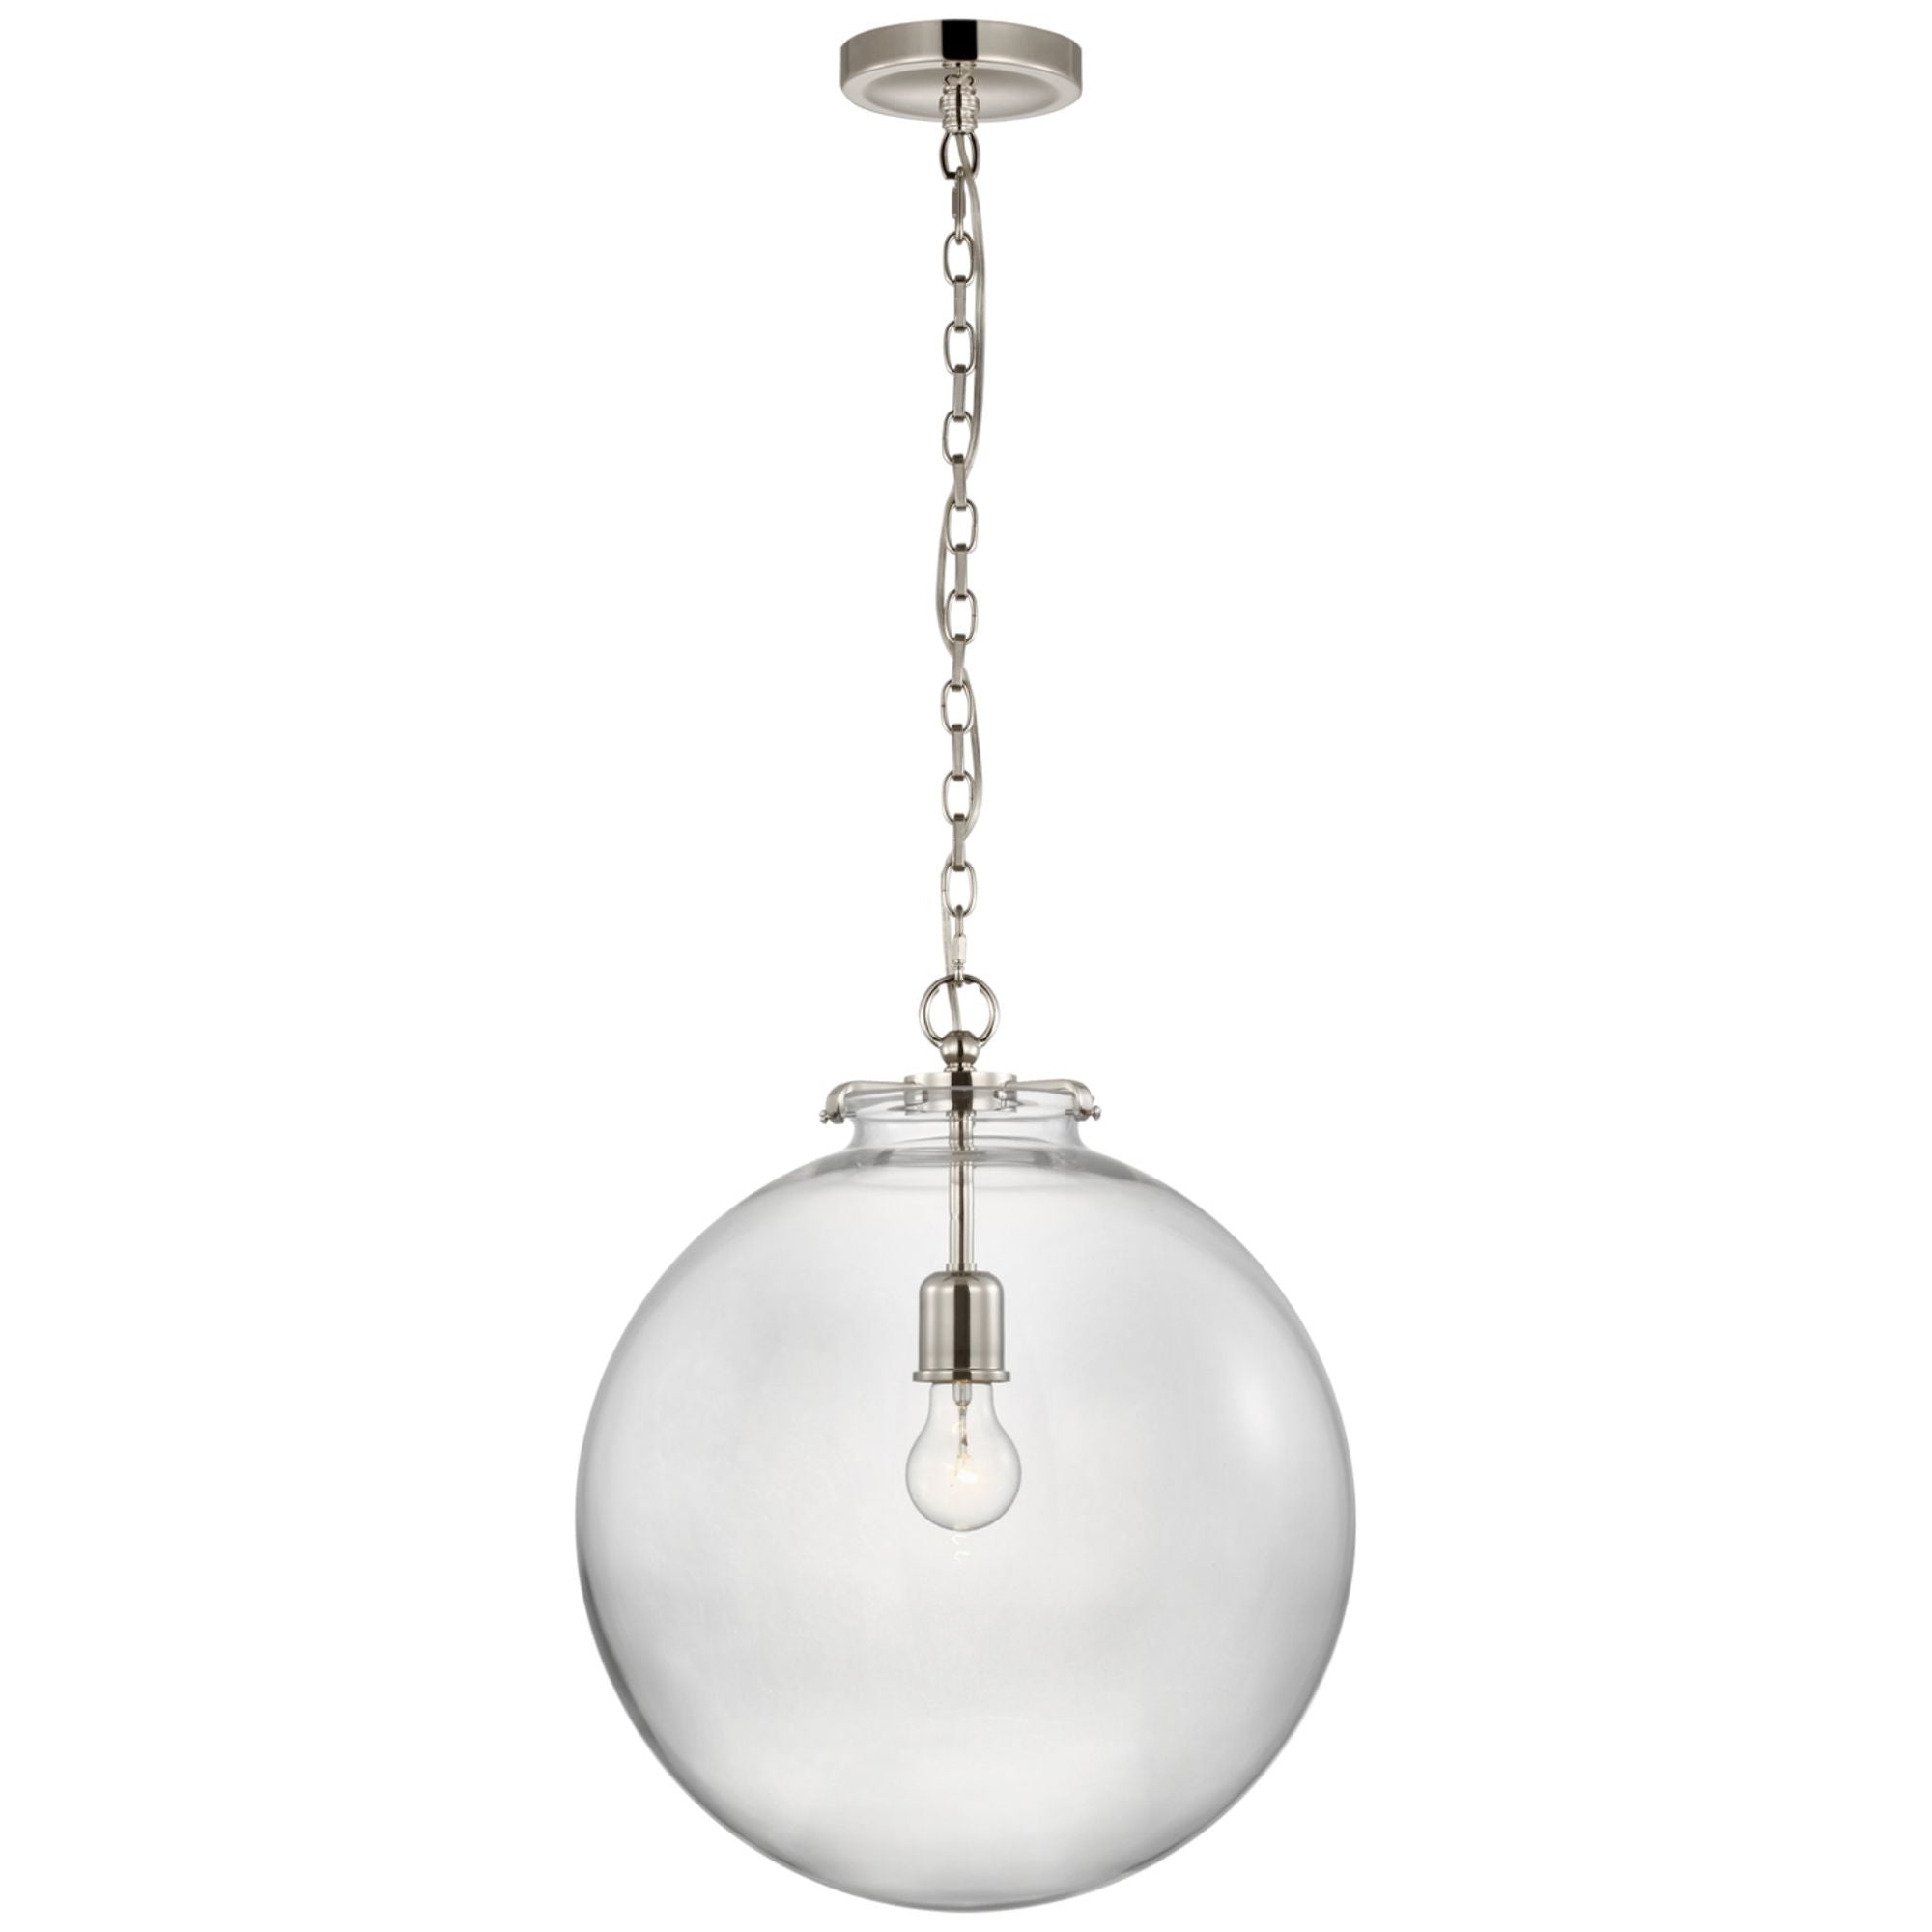 Thomas O'Brien Katie Large Globe Pendant in Polished Nickel with Clear Glass